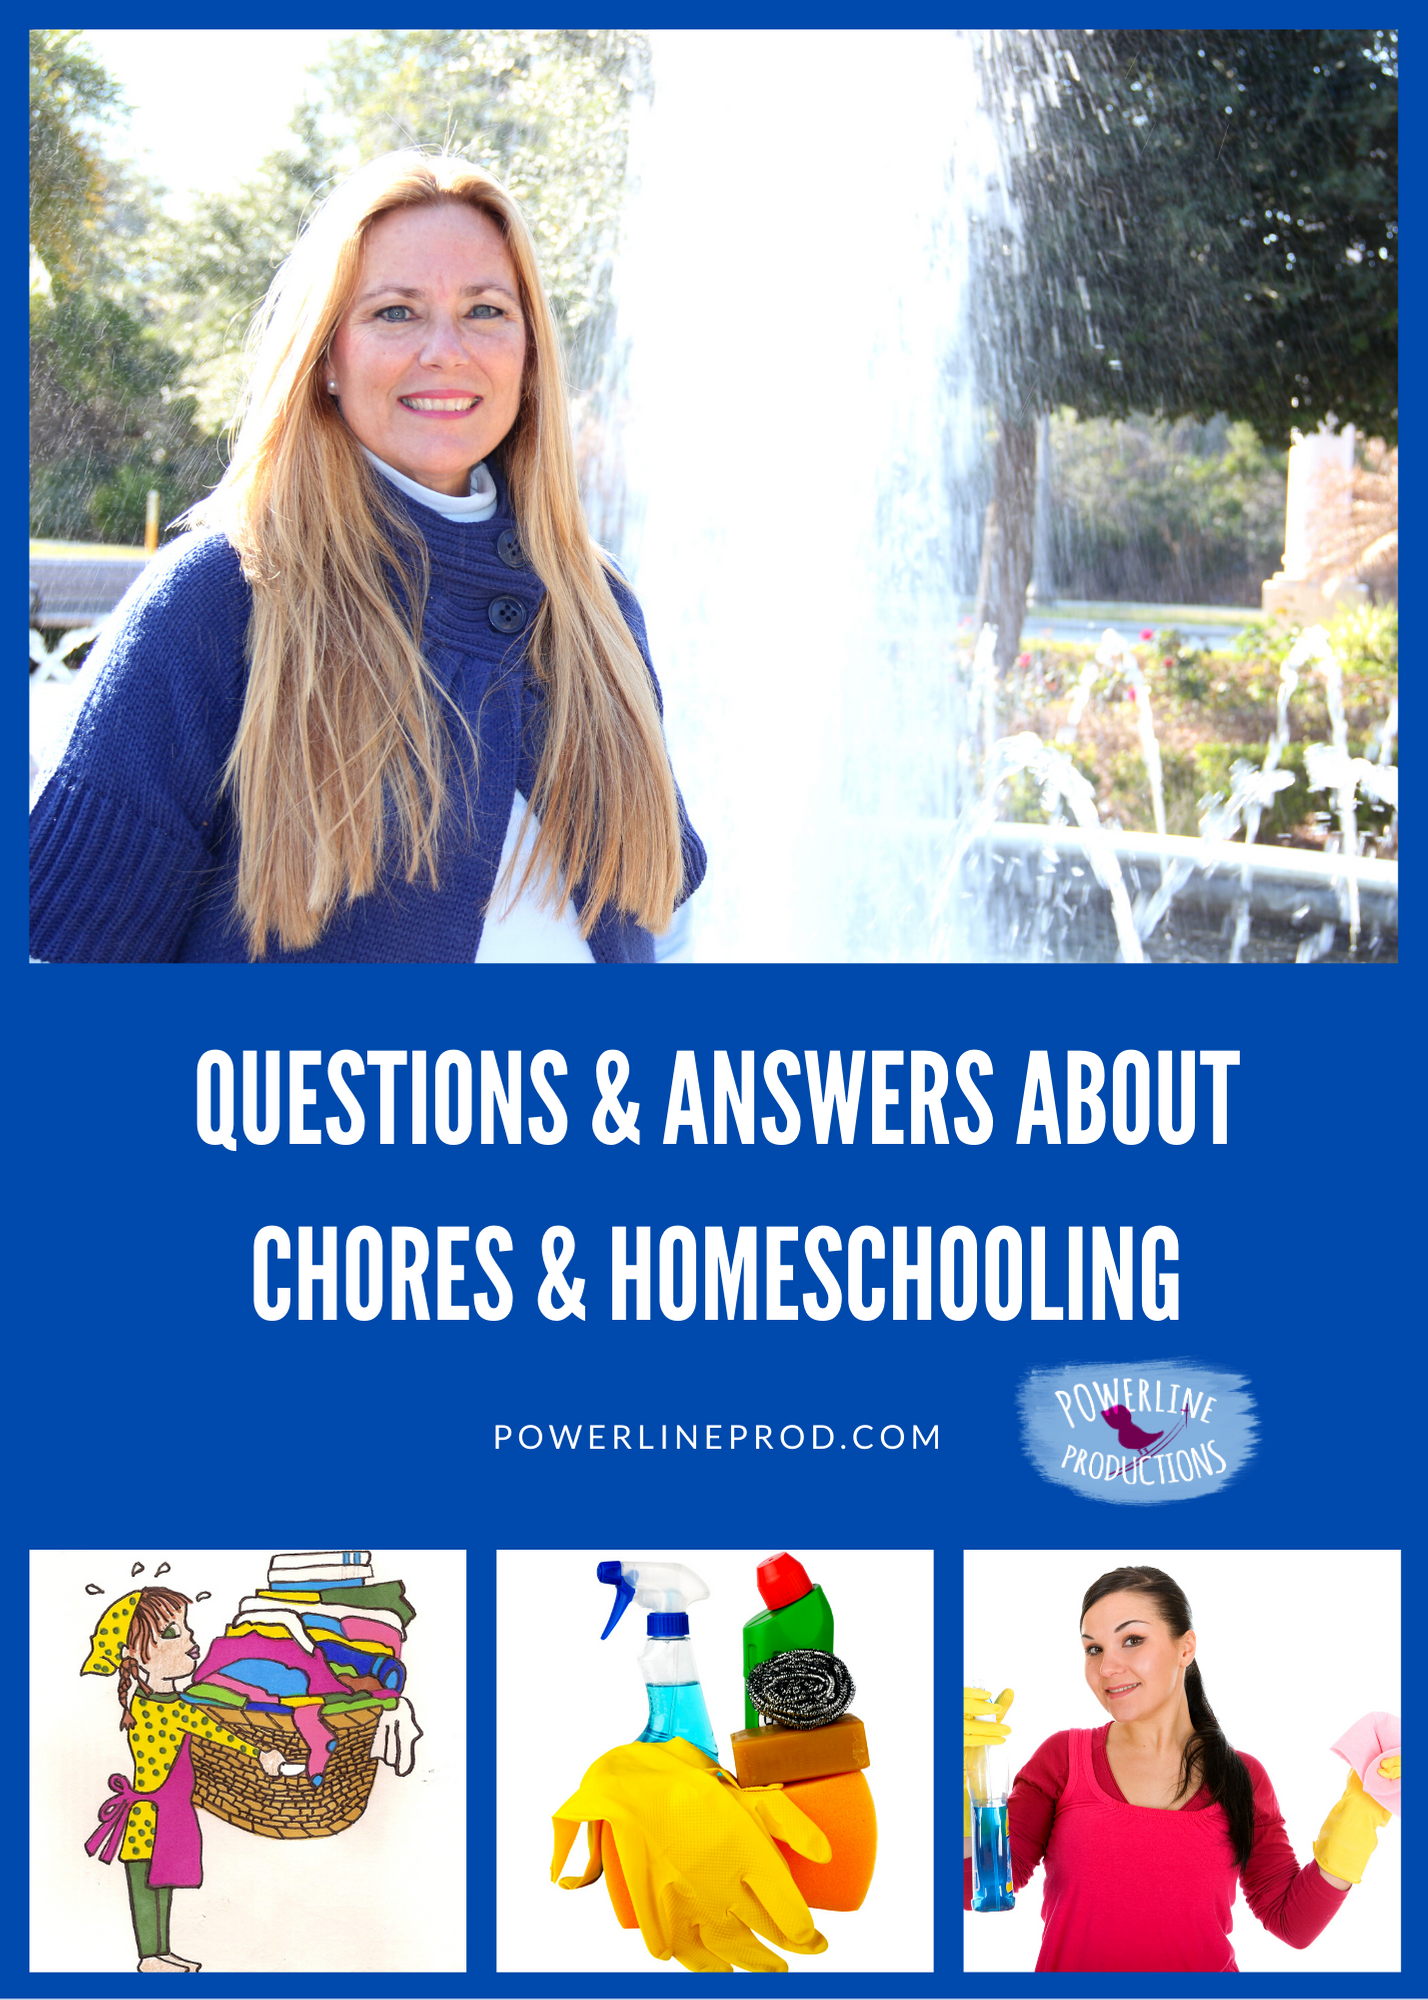 Questions and Answers about Chores & Homeschooling Blog